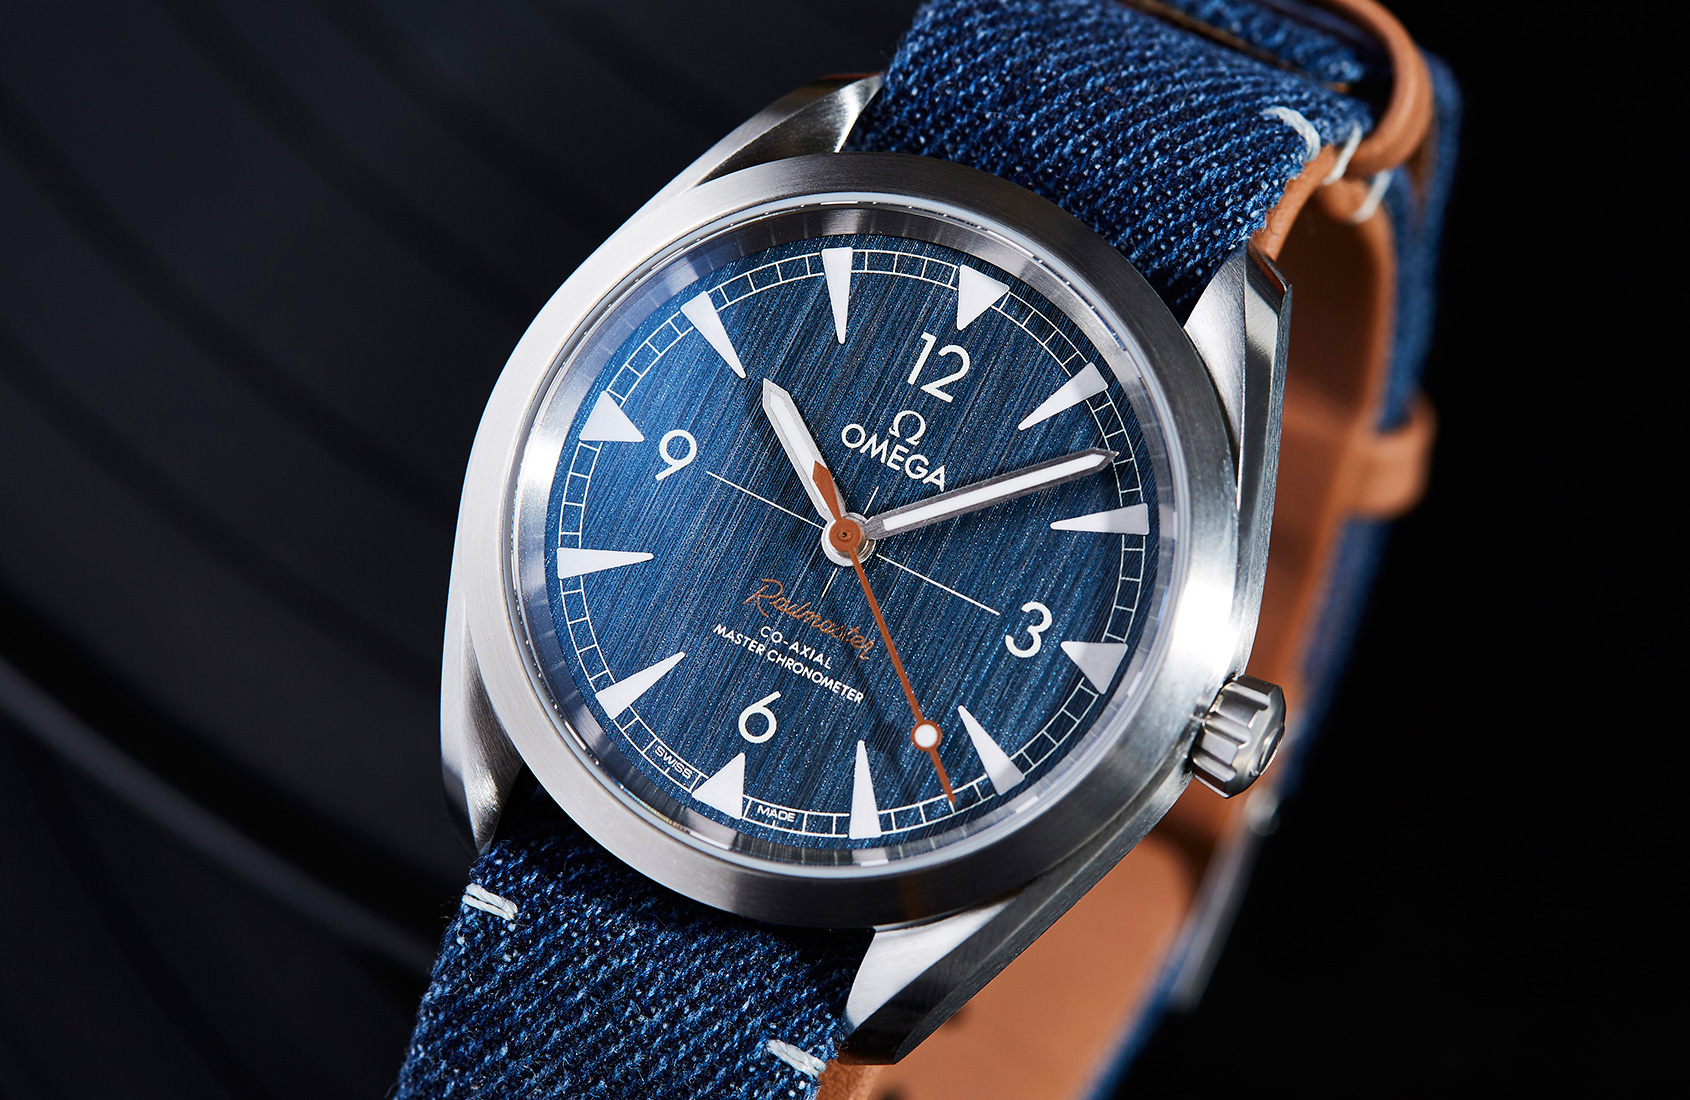 Is this double-denim Omega Seamaster 